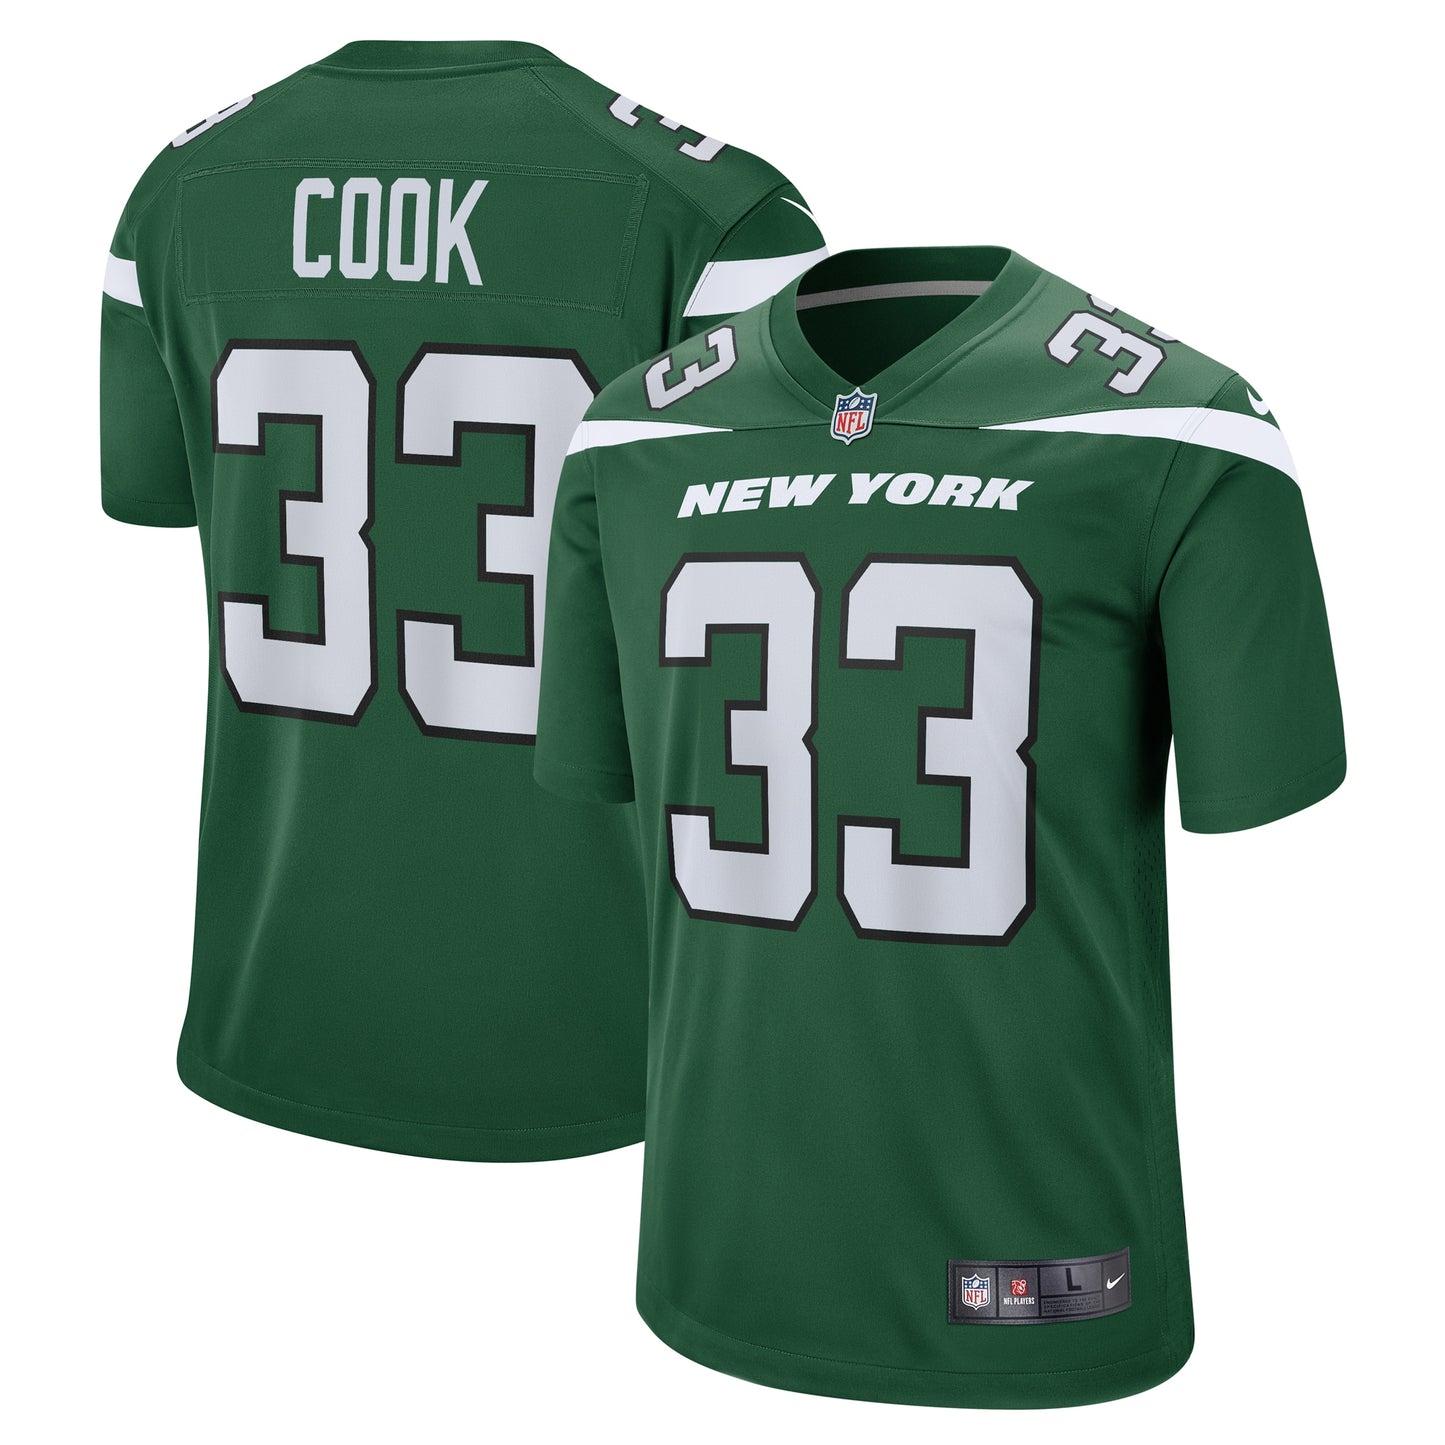 Dalvin Cook New York Jets Nike Game Player Jersey - Gotham Green